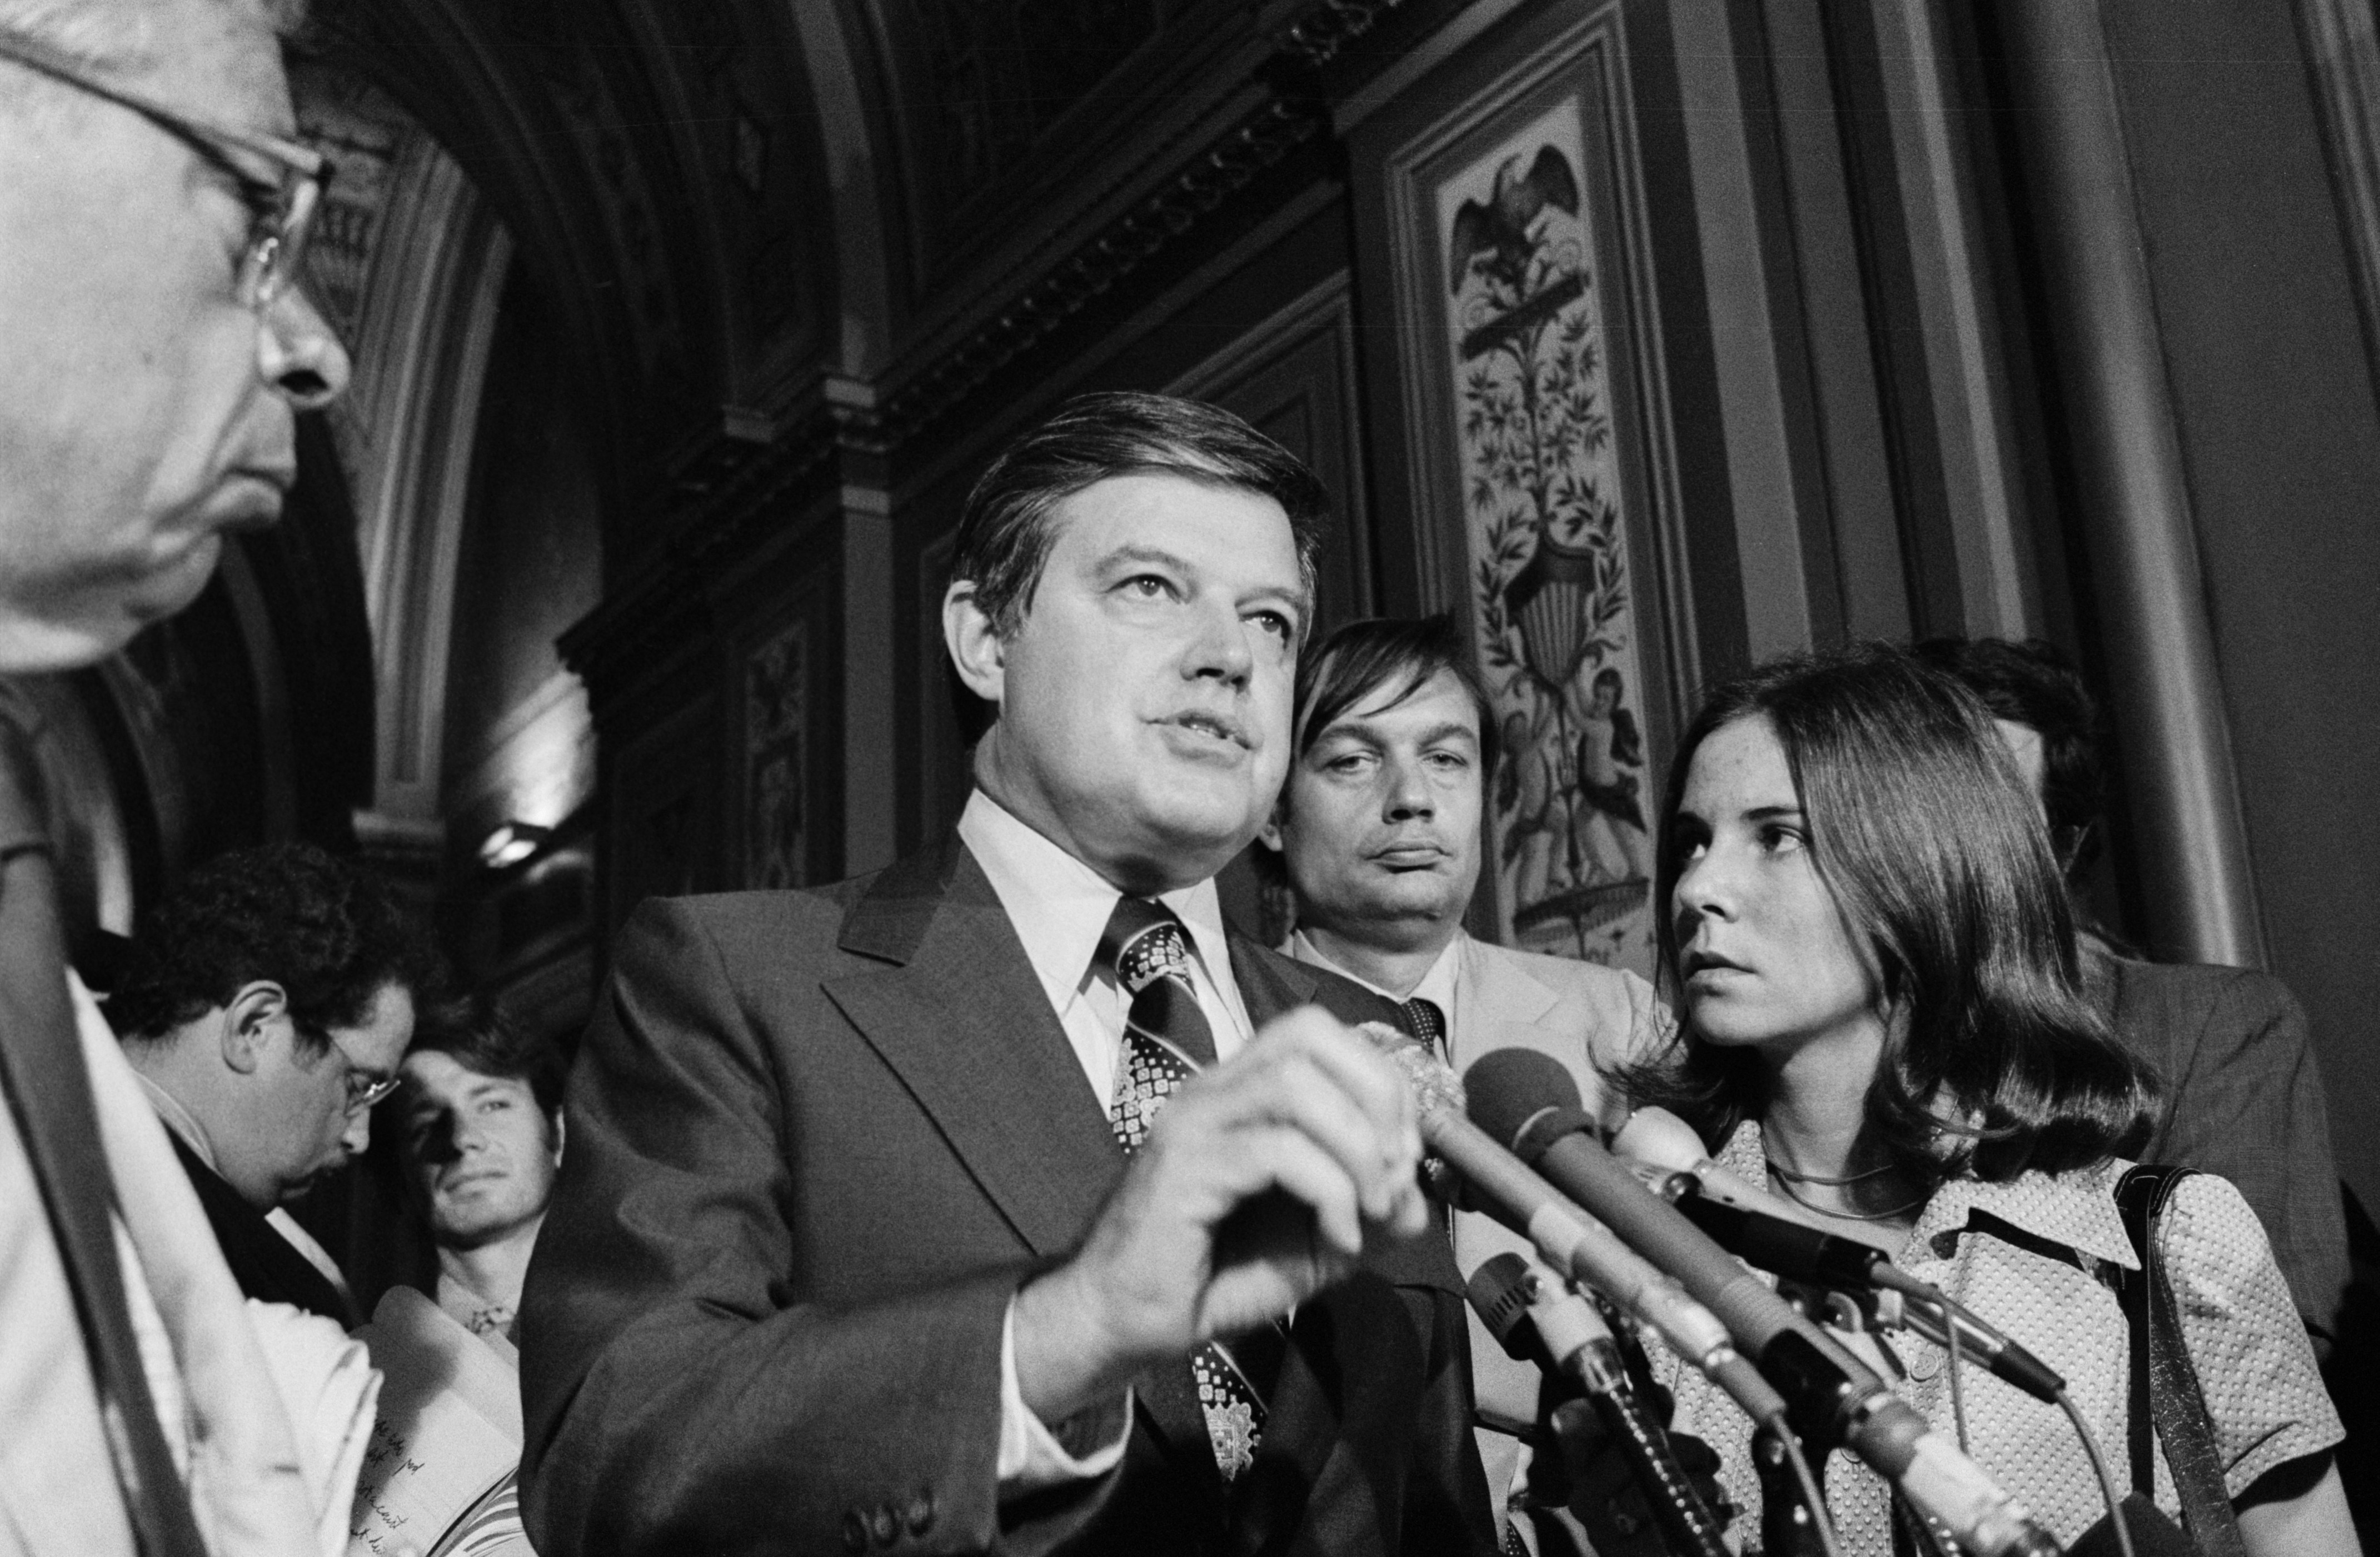 (Original Caption) Senator Frank church (D-Idaho), chairman of the Senate Select committee on Intelligence, tells newsmen July 10 that his committee, which has been investigating CIA activities, has been getting Excellent cooperation from the White house. But he said the F.B.I. had not turned over material requested nearly two months ago.